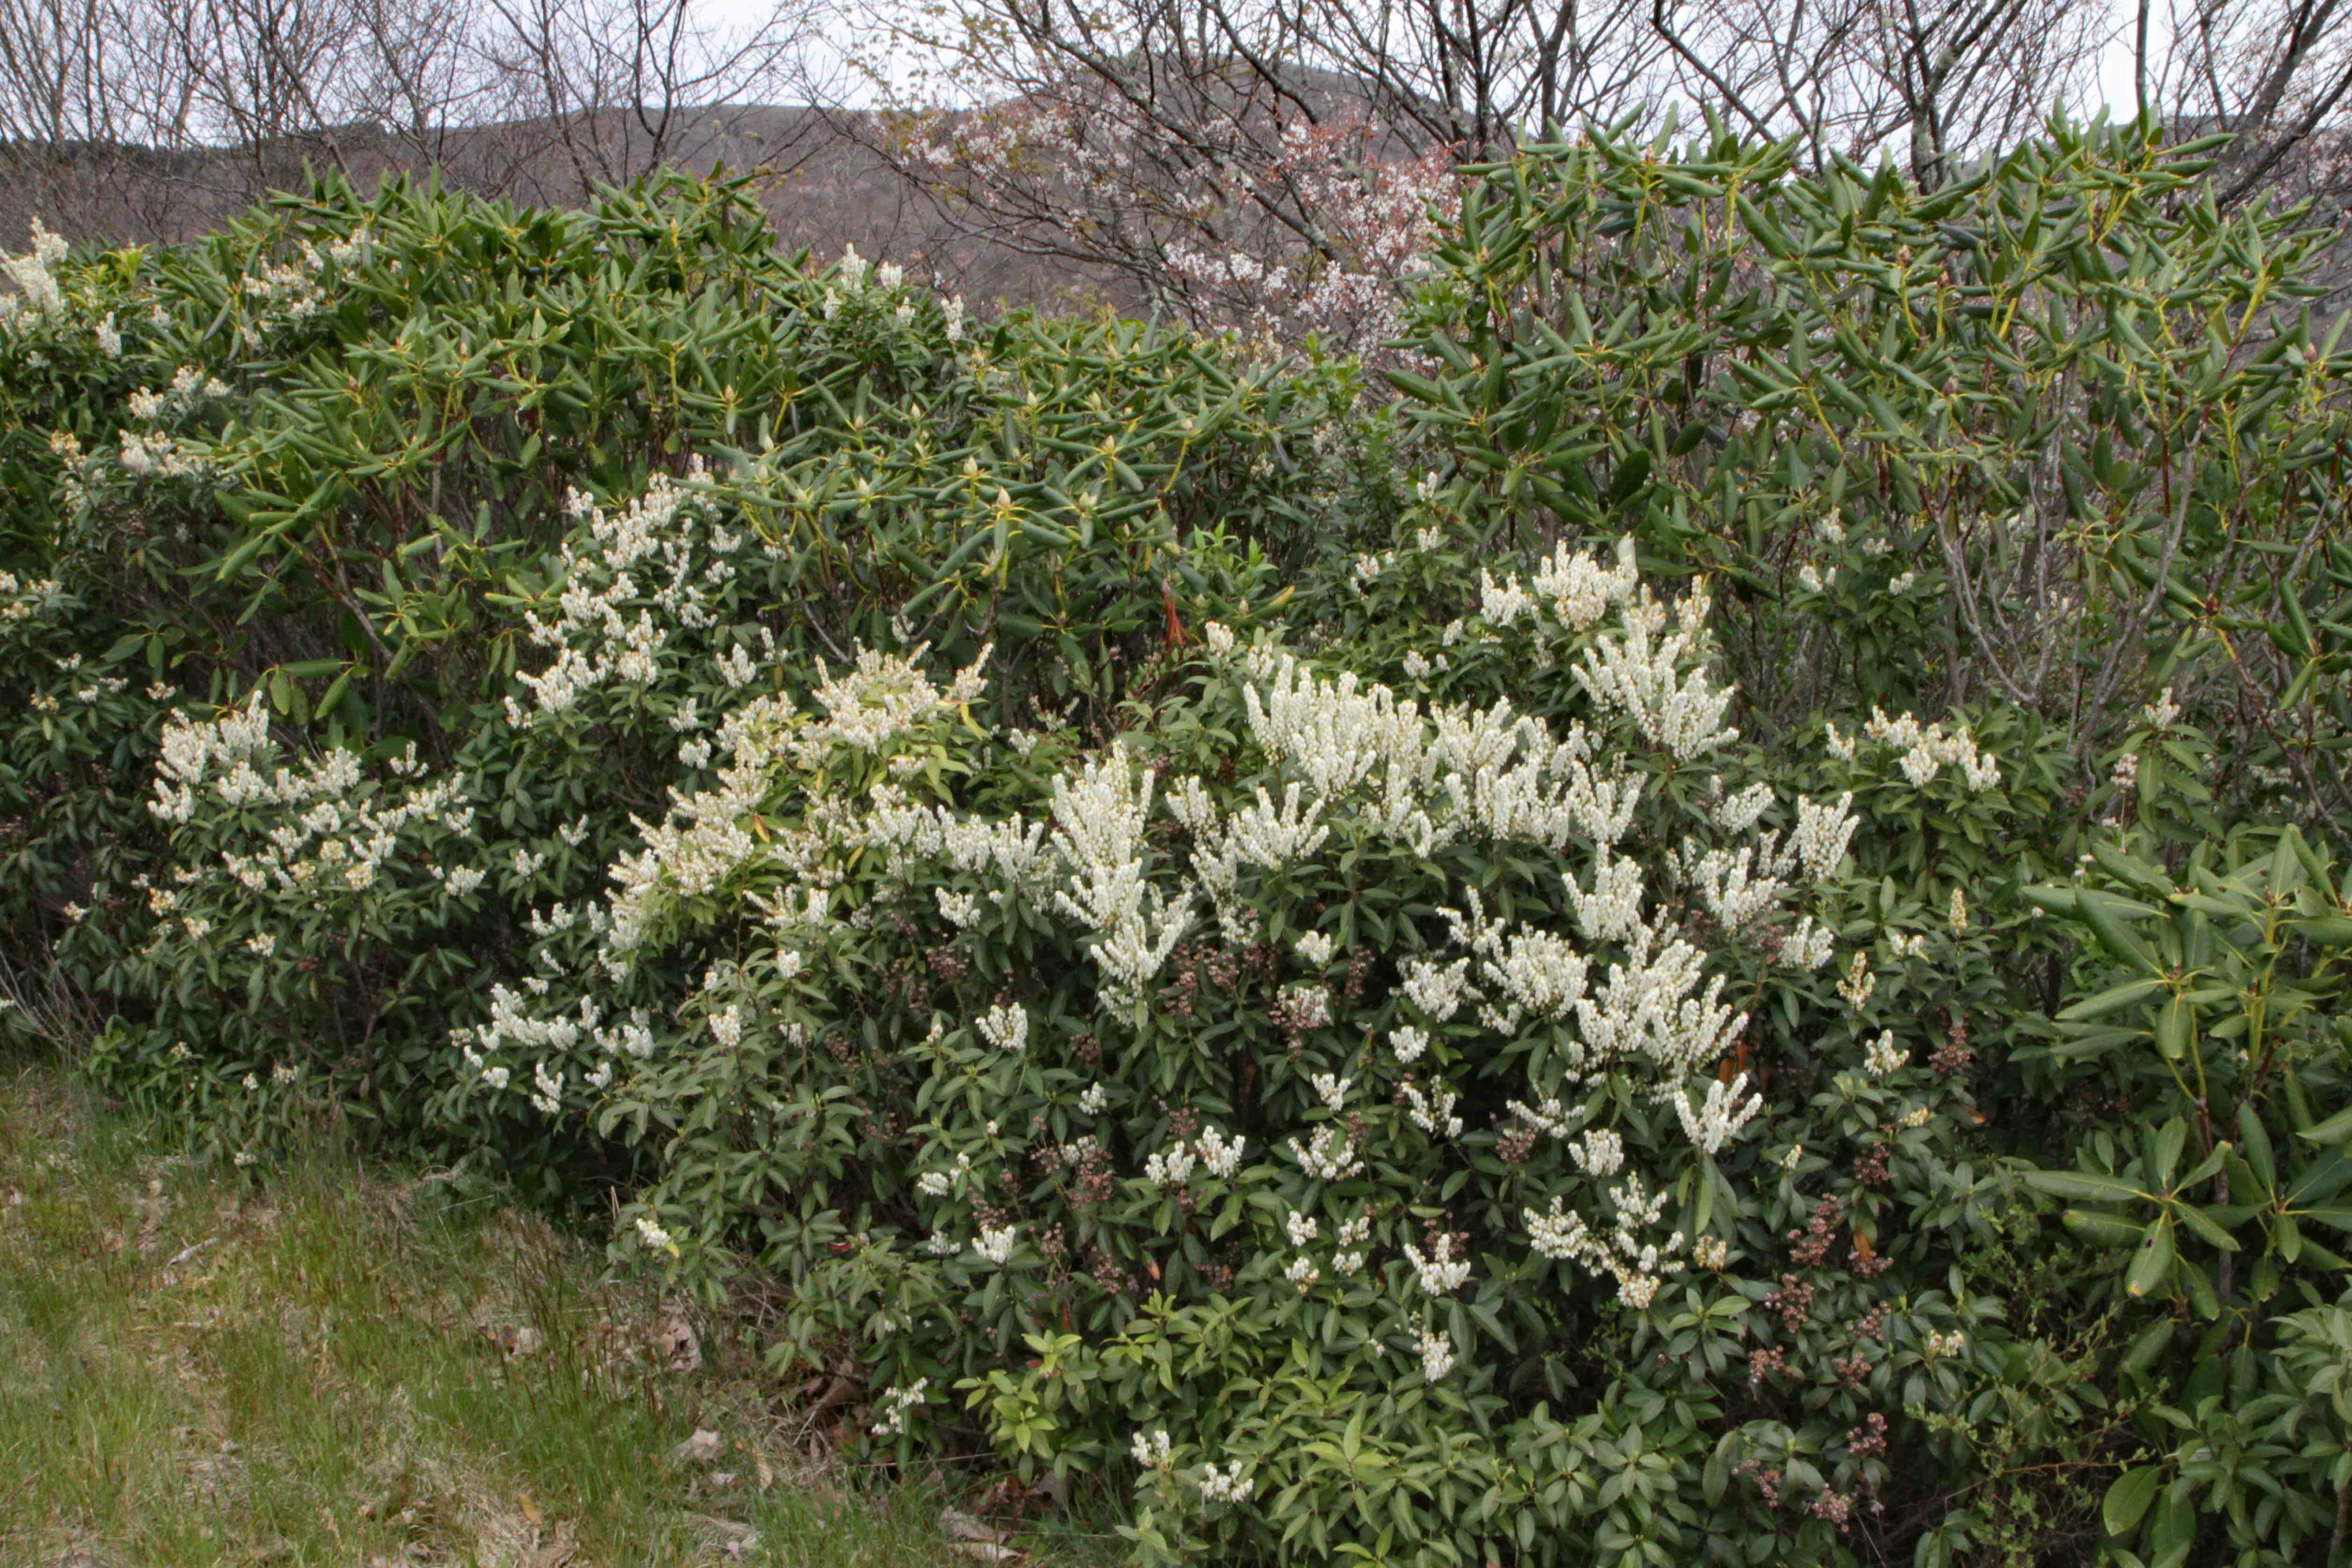 The Scientific Name is Pieris floribunda. You will likely hear them called Mountain Andromeda, Evergreen Mountain Fetterbush. This picture shows the Masses of Pieris floribunda covered with bright white blossoms line a 10-mile section of the Blue Ridge Parkway south of Graveyard Fields. of Pieris floribunda